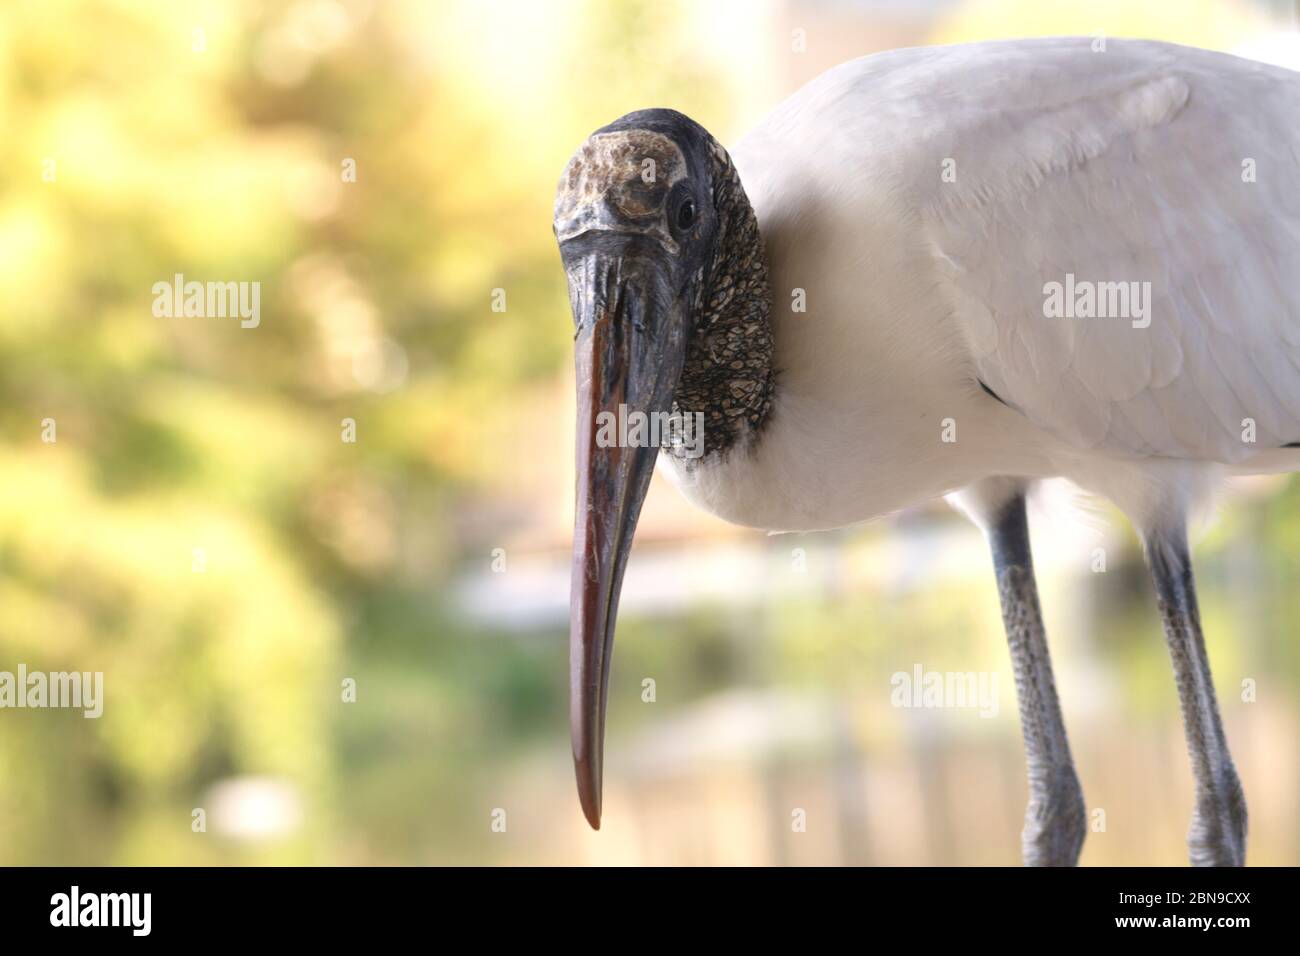 Close up of threatened Wood Stork against glowing sunlit background in Florida; Stock Photo